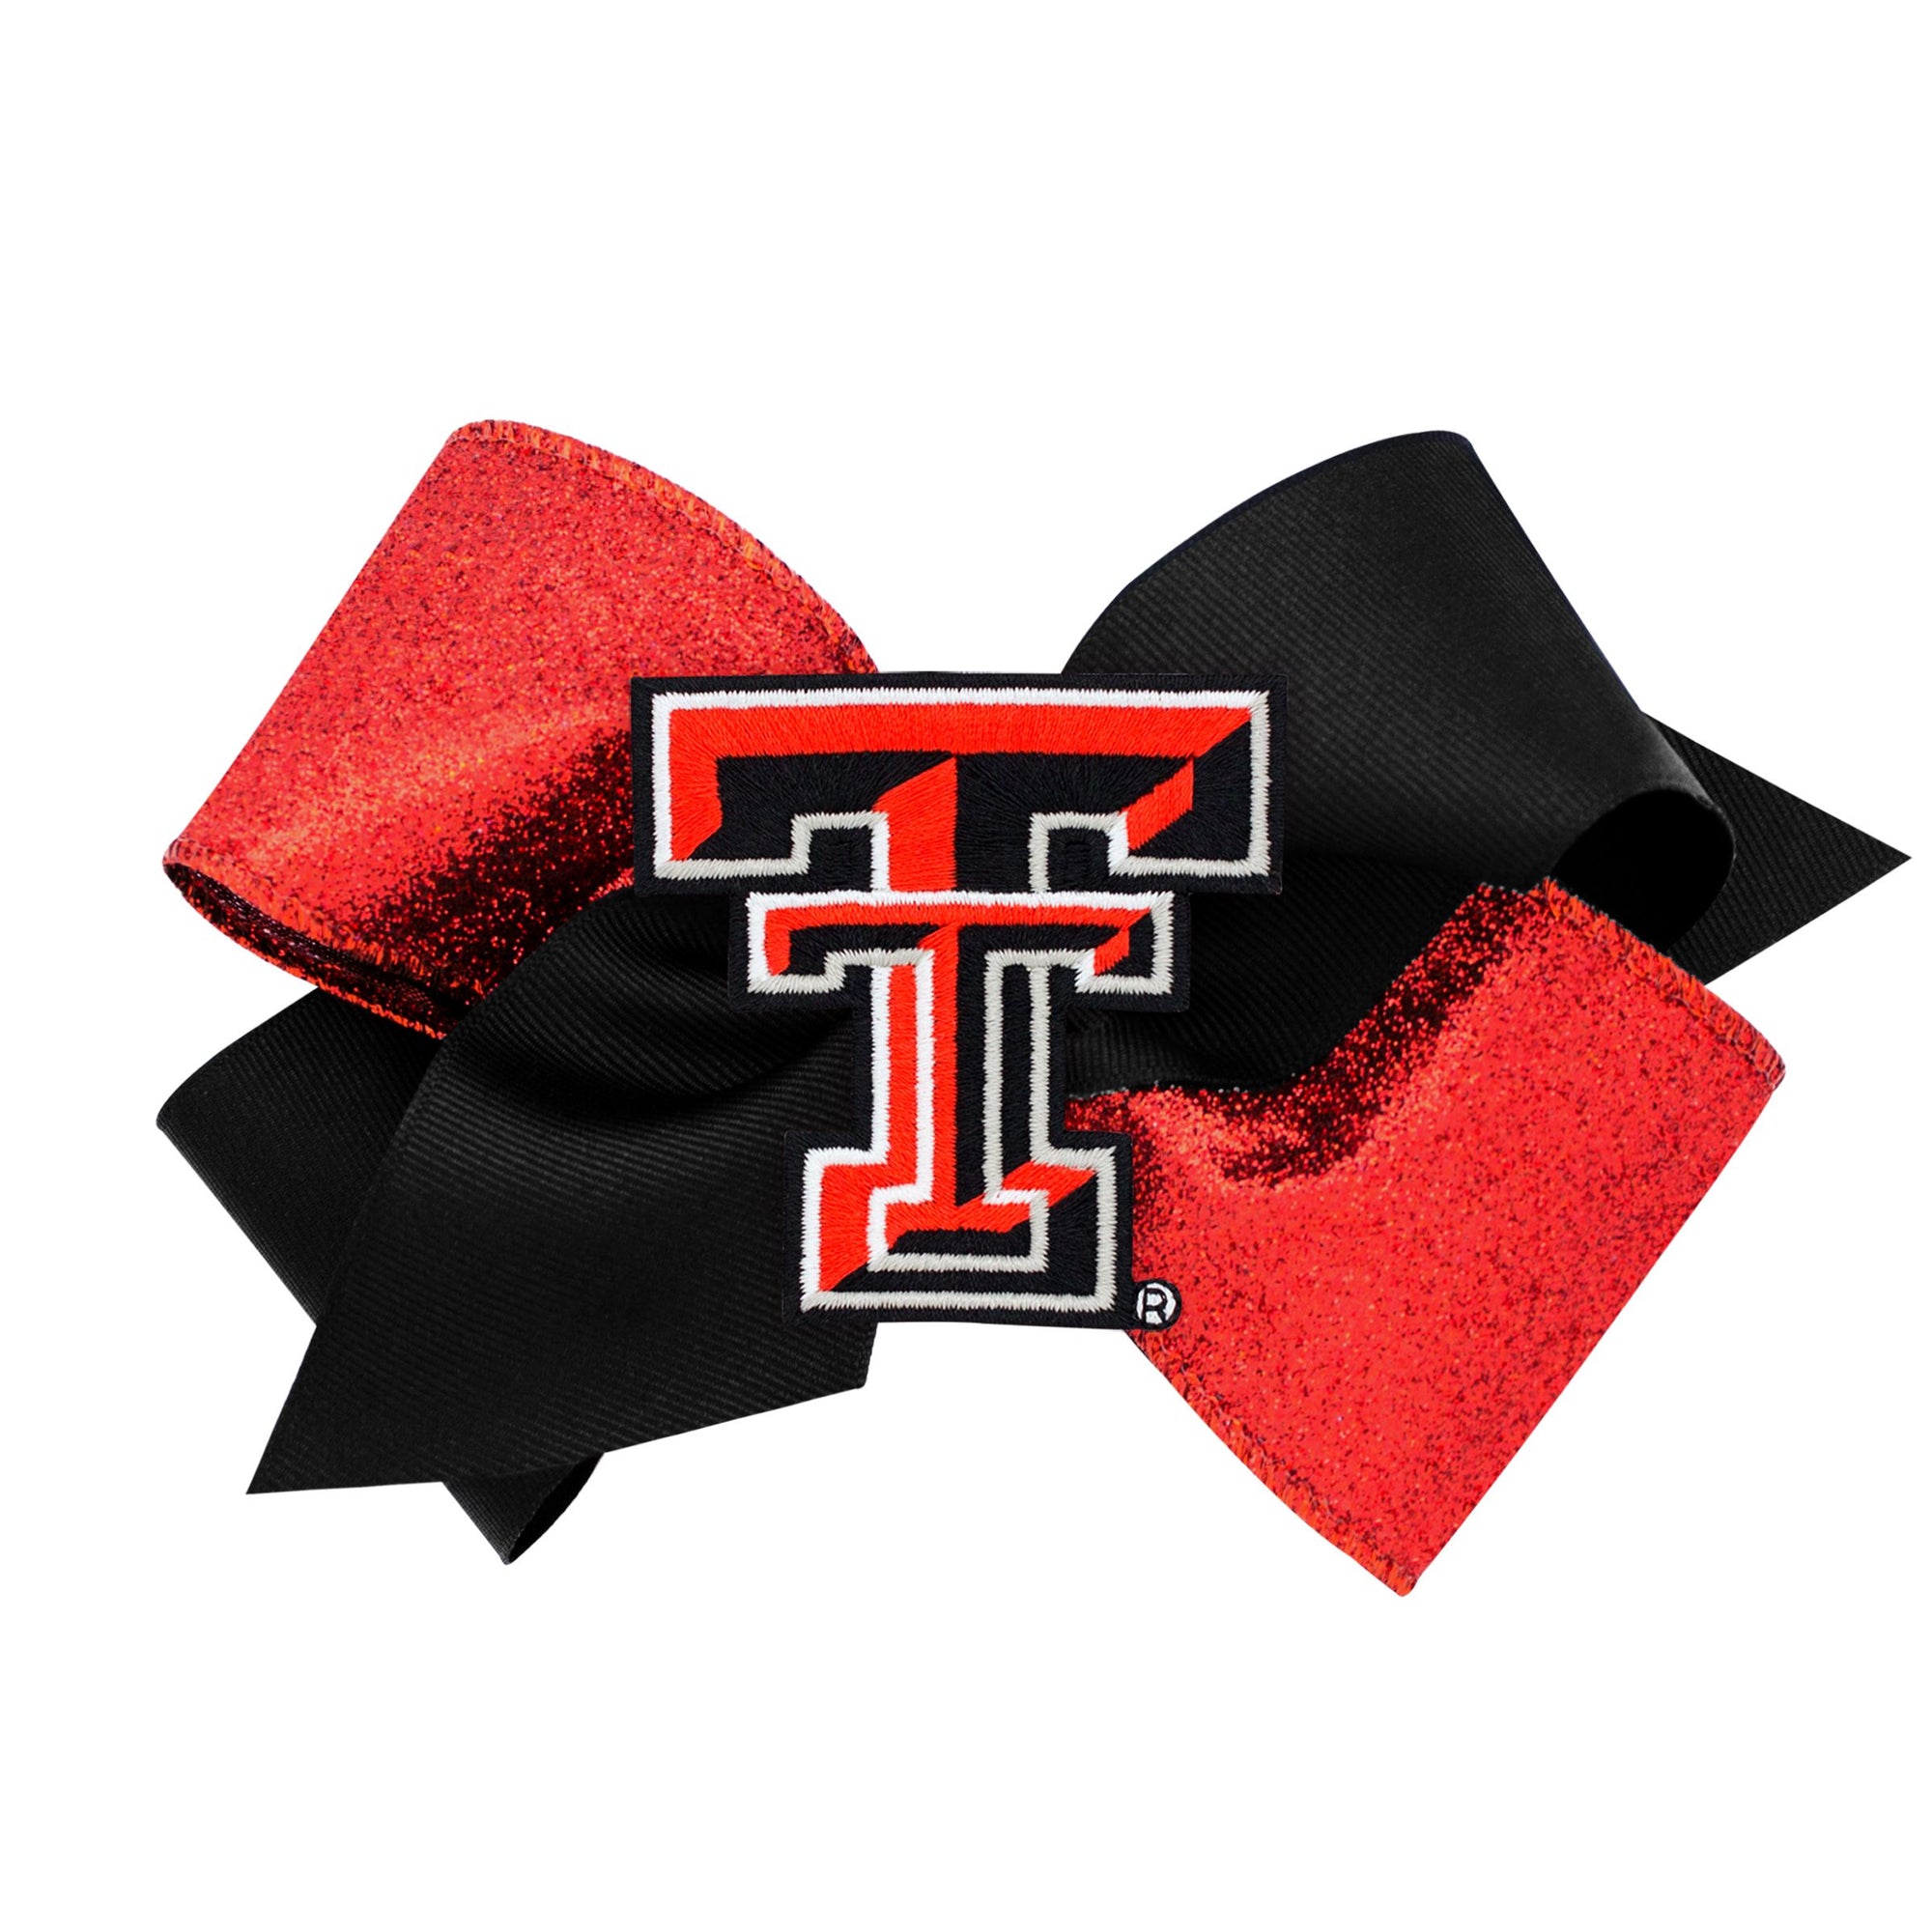 King Two Tone Glitter Grosgrain Bow with Patch | Texas Tech